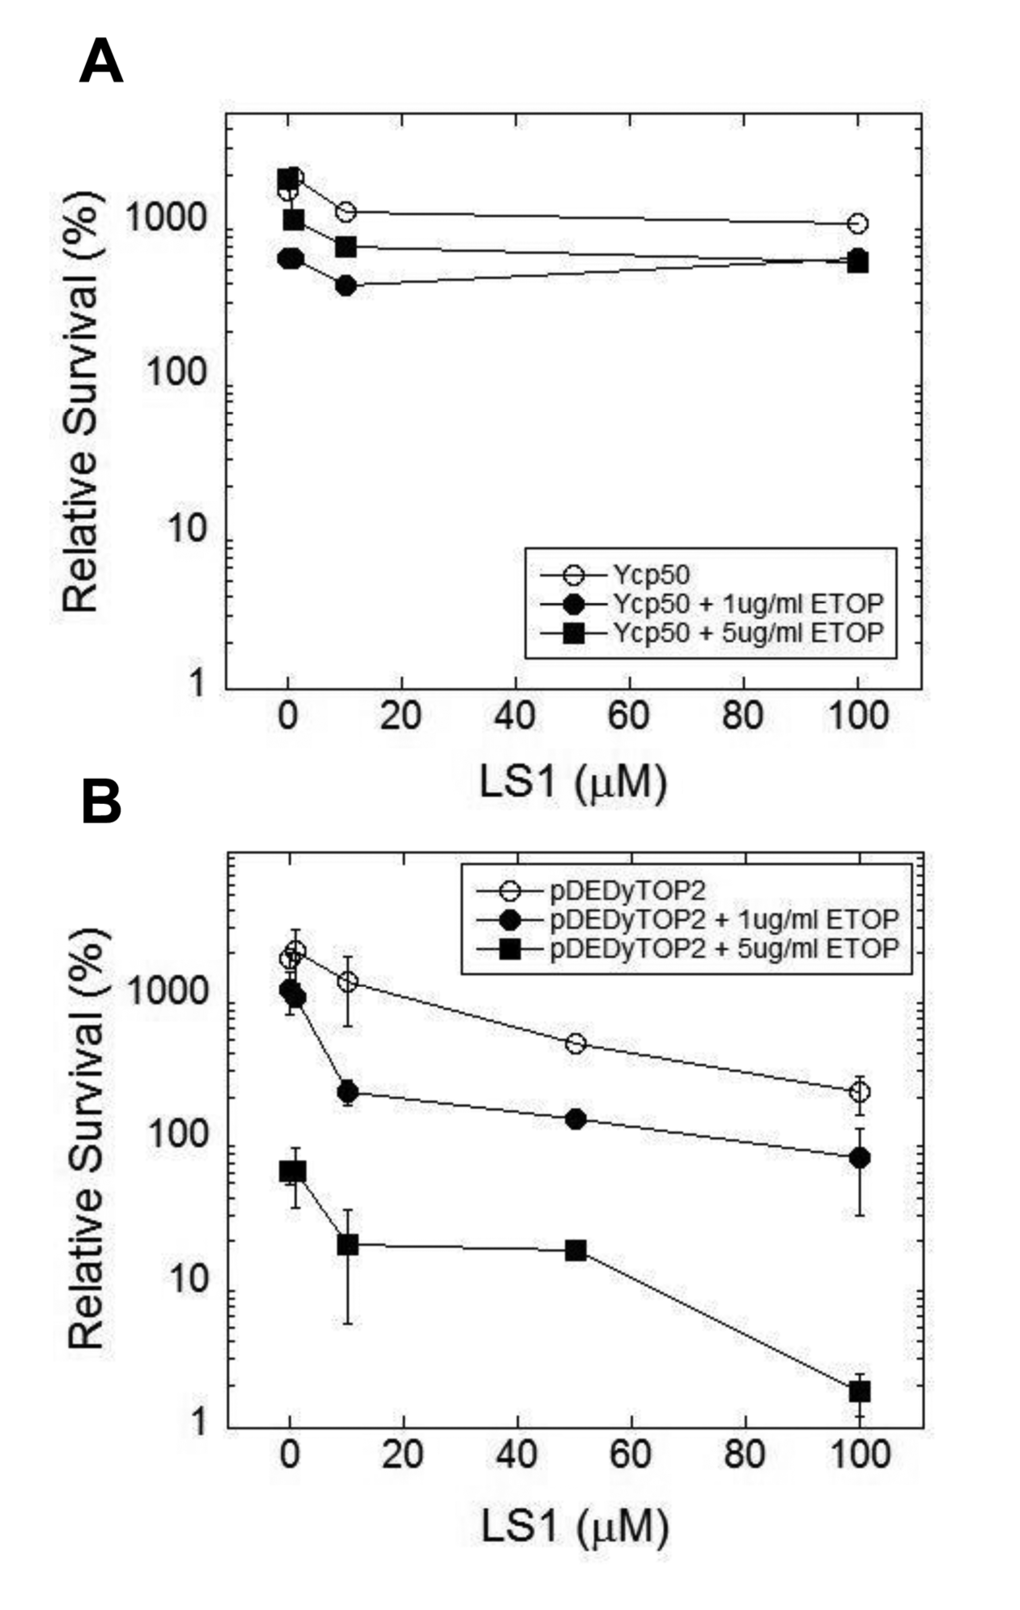 LS1 enhances killing of yeast by etoposide. LS1 enhances etoposide (ETOP) cytotoxicity in cells overexpressing TOP2. (A) Cells expressing native levels of TOP2 are not sensitive to ETOP in the presence of LS1. Cells contained an empty CEN plasmid Ycp50. (B) Overexpression of TOP2 (YCPpDED1-TOP2) increased sensitivity to ETOP in the presence of LS1. Yeast strain YMM10 [80], which contains gene deletions in several drug efflux pumps, was used to promote ETOP sensitivity.